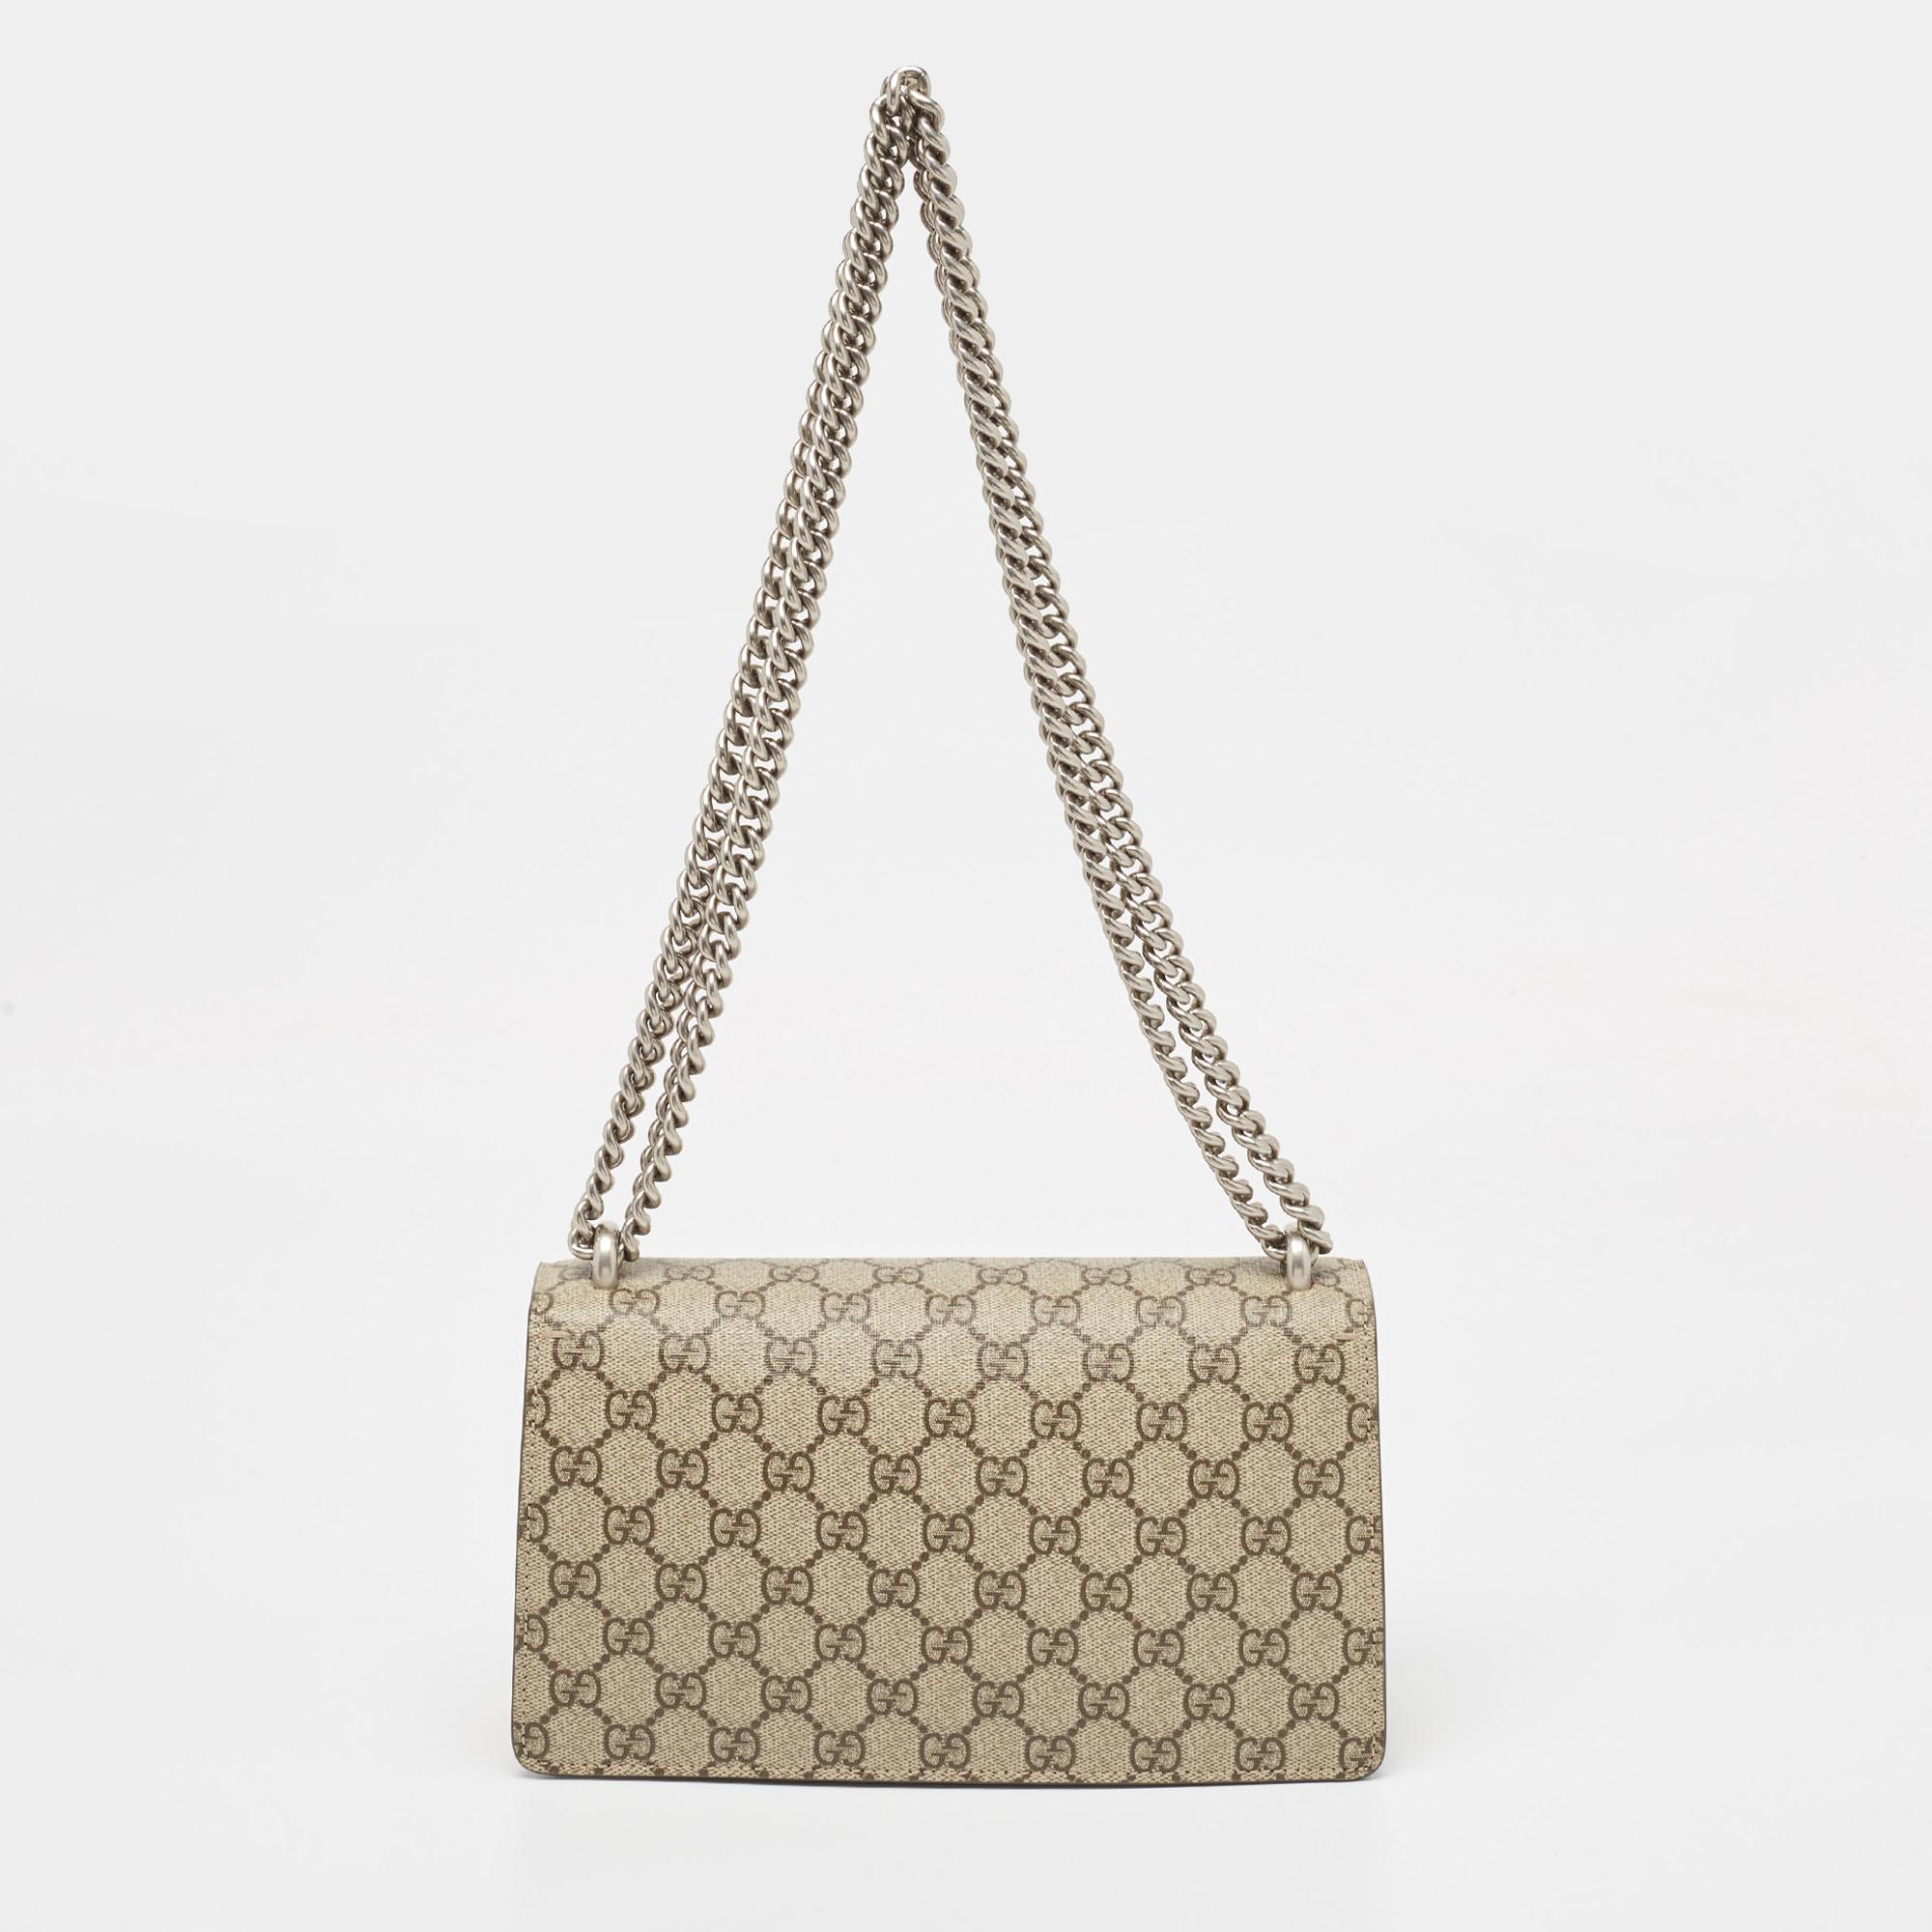 The Gucci GG Dionysus Shoulder Bag exudes elegance with its iconic GG canvas and luxurious suede. Its compact, rectangular silhouette is adorned with the signature Dionysus tiger head closure, making it a sophisticated accessory perfect for any